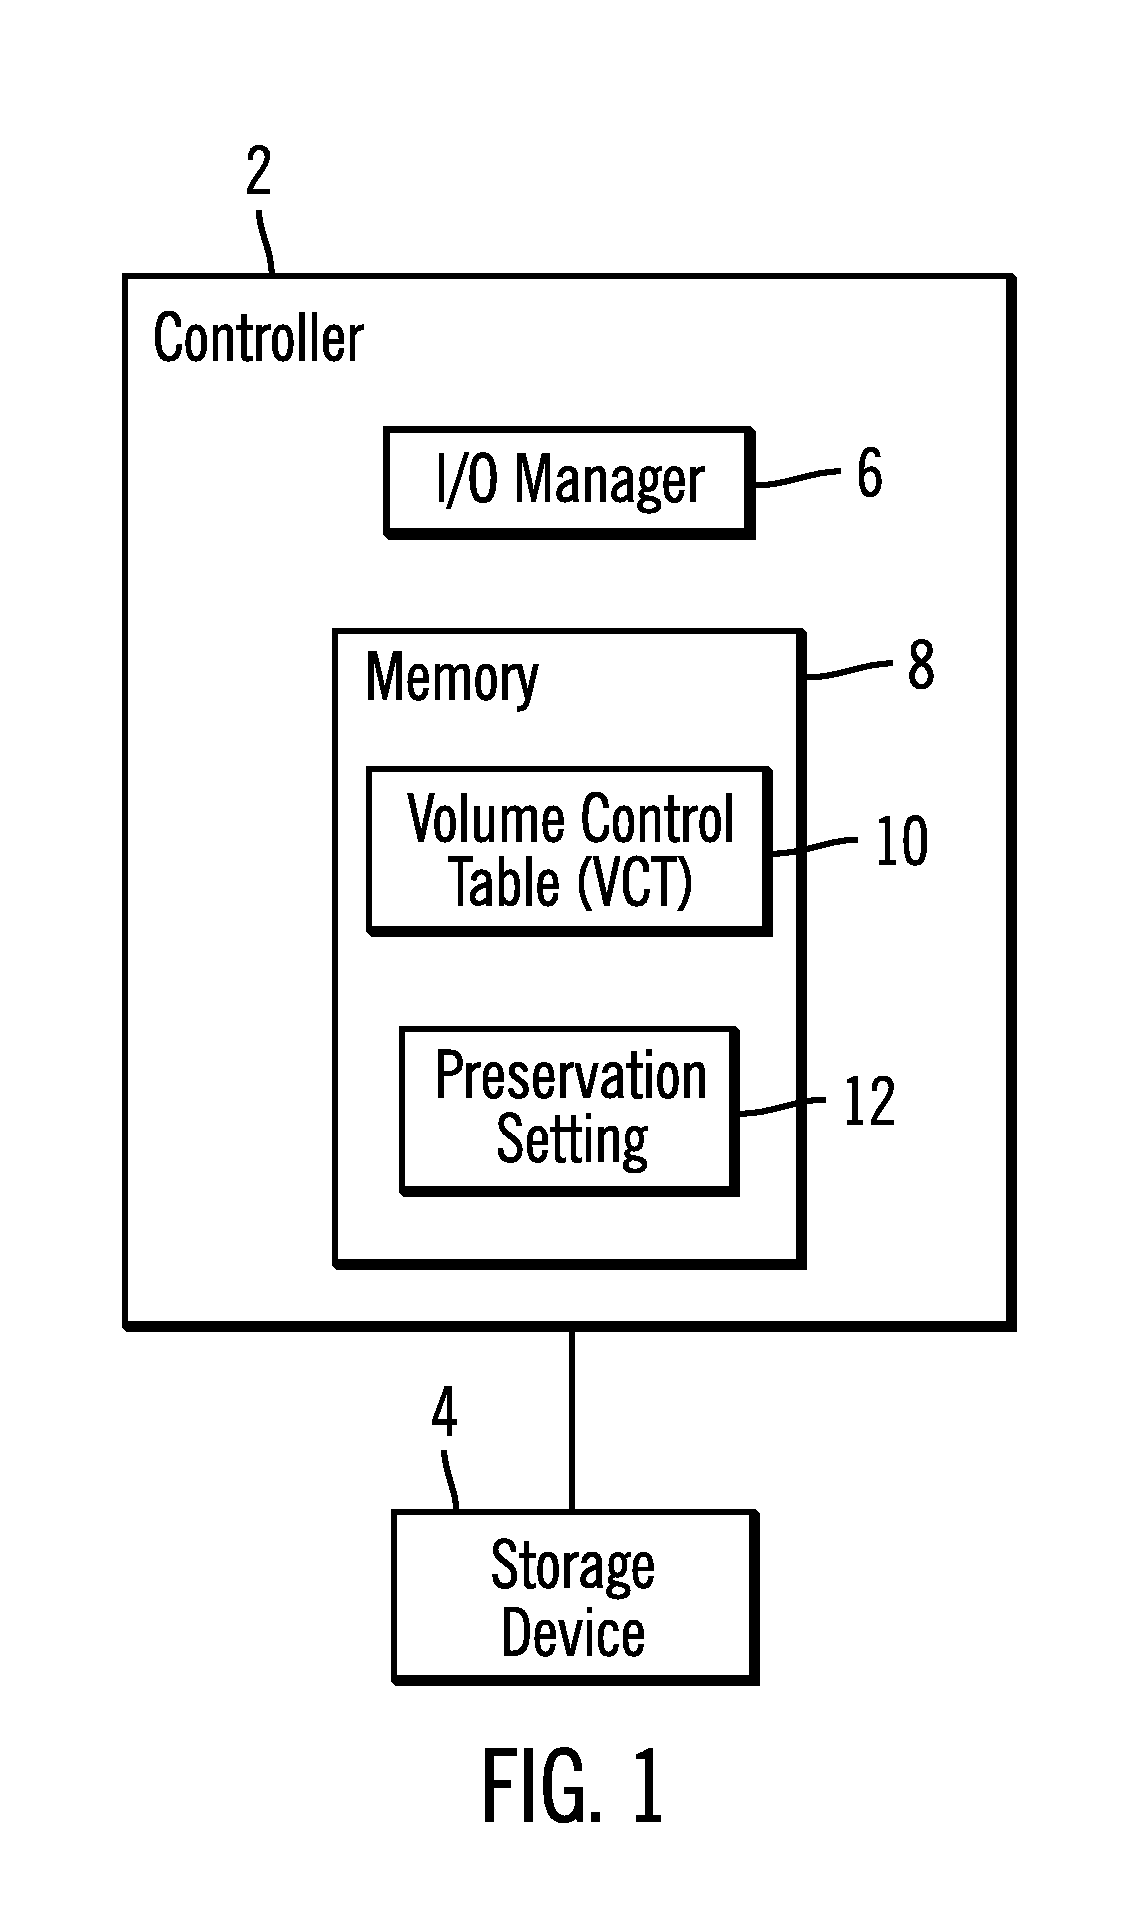 Providing versioning in a storage device